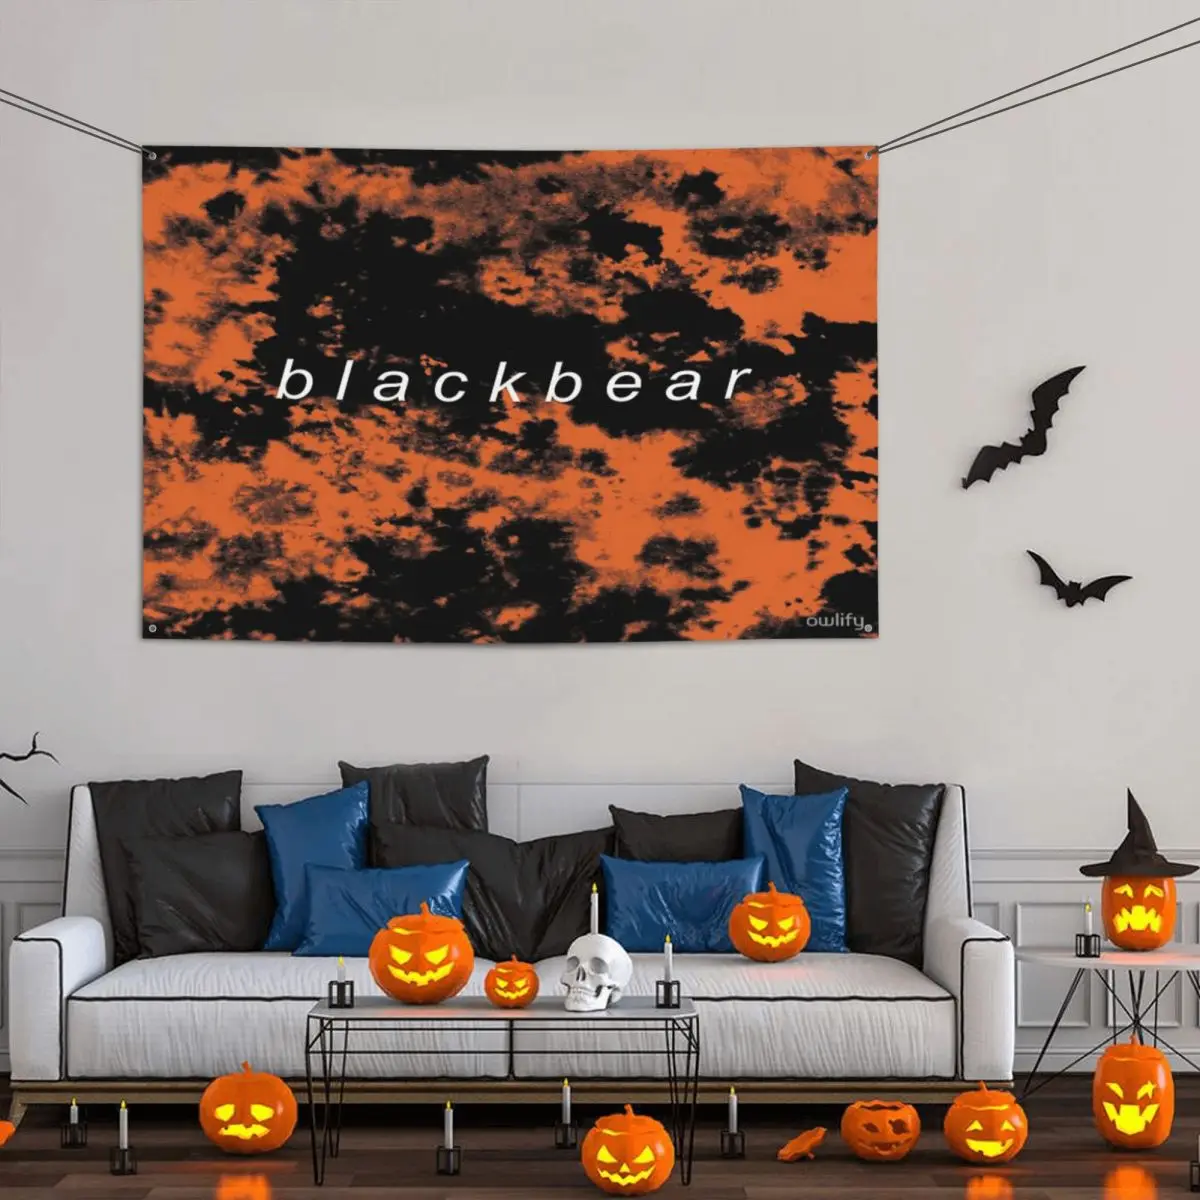 

Blackbear Tie Dye Party Banner Decor 120x180cm Polyester Material Easy To Hang Fade Resistant Delicate